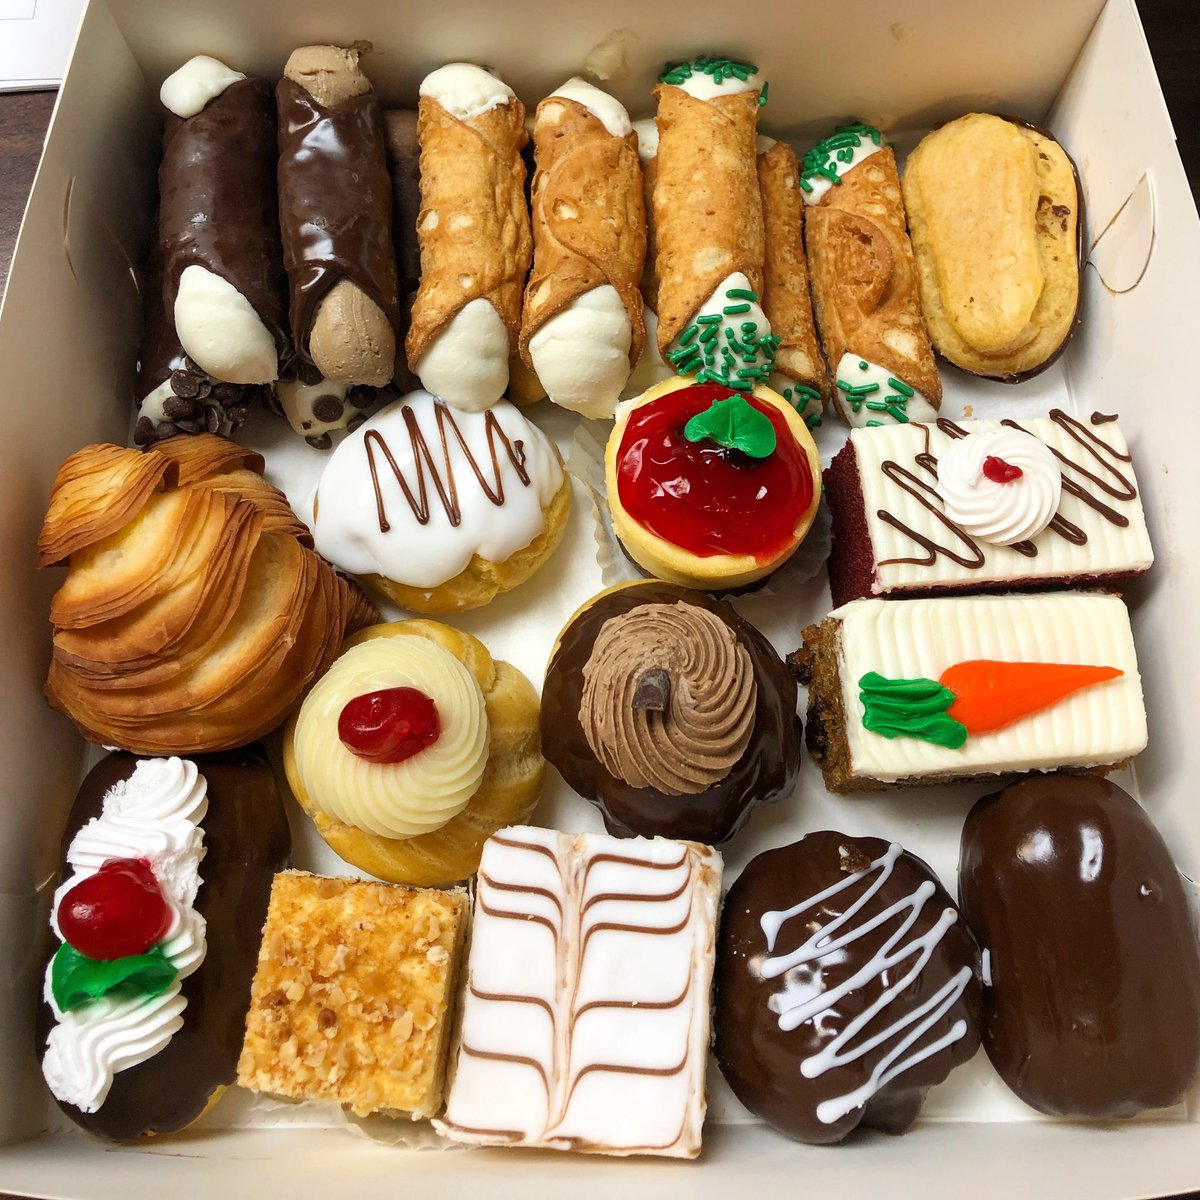 In the great tradition of Italian-American family-grown businesses, Artuso Pastry has become a nationally recognized culinary treasure through dedication and authenticity. The tale begins in 1930 when Vincent Artuso Sr. and his siblings left their native Reggio di Calabria,